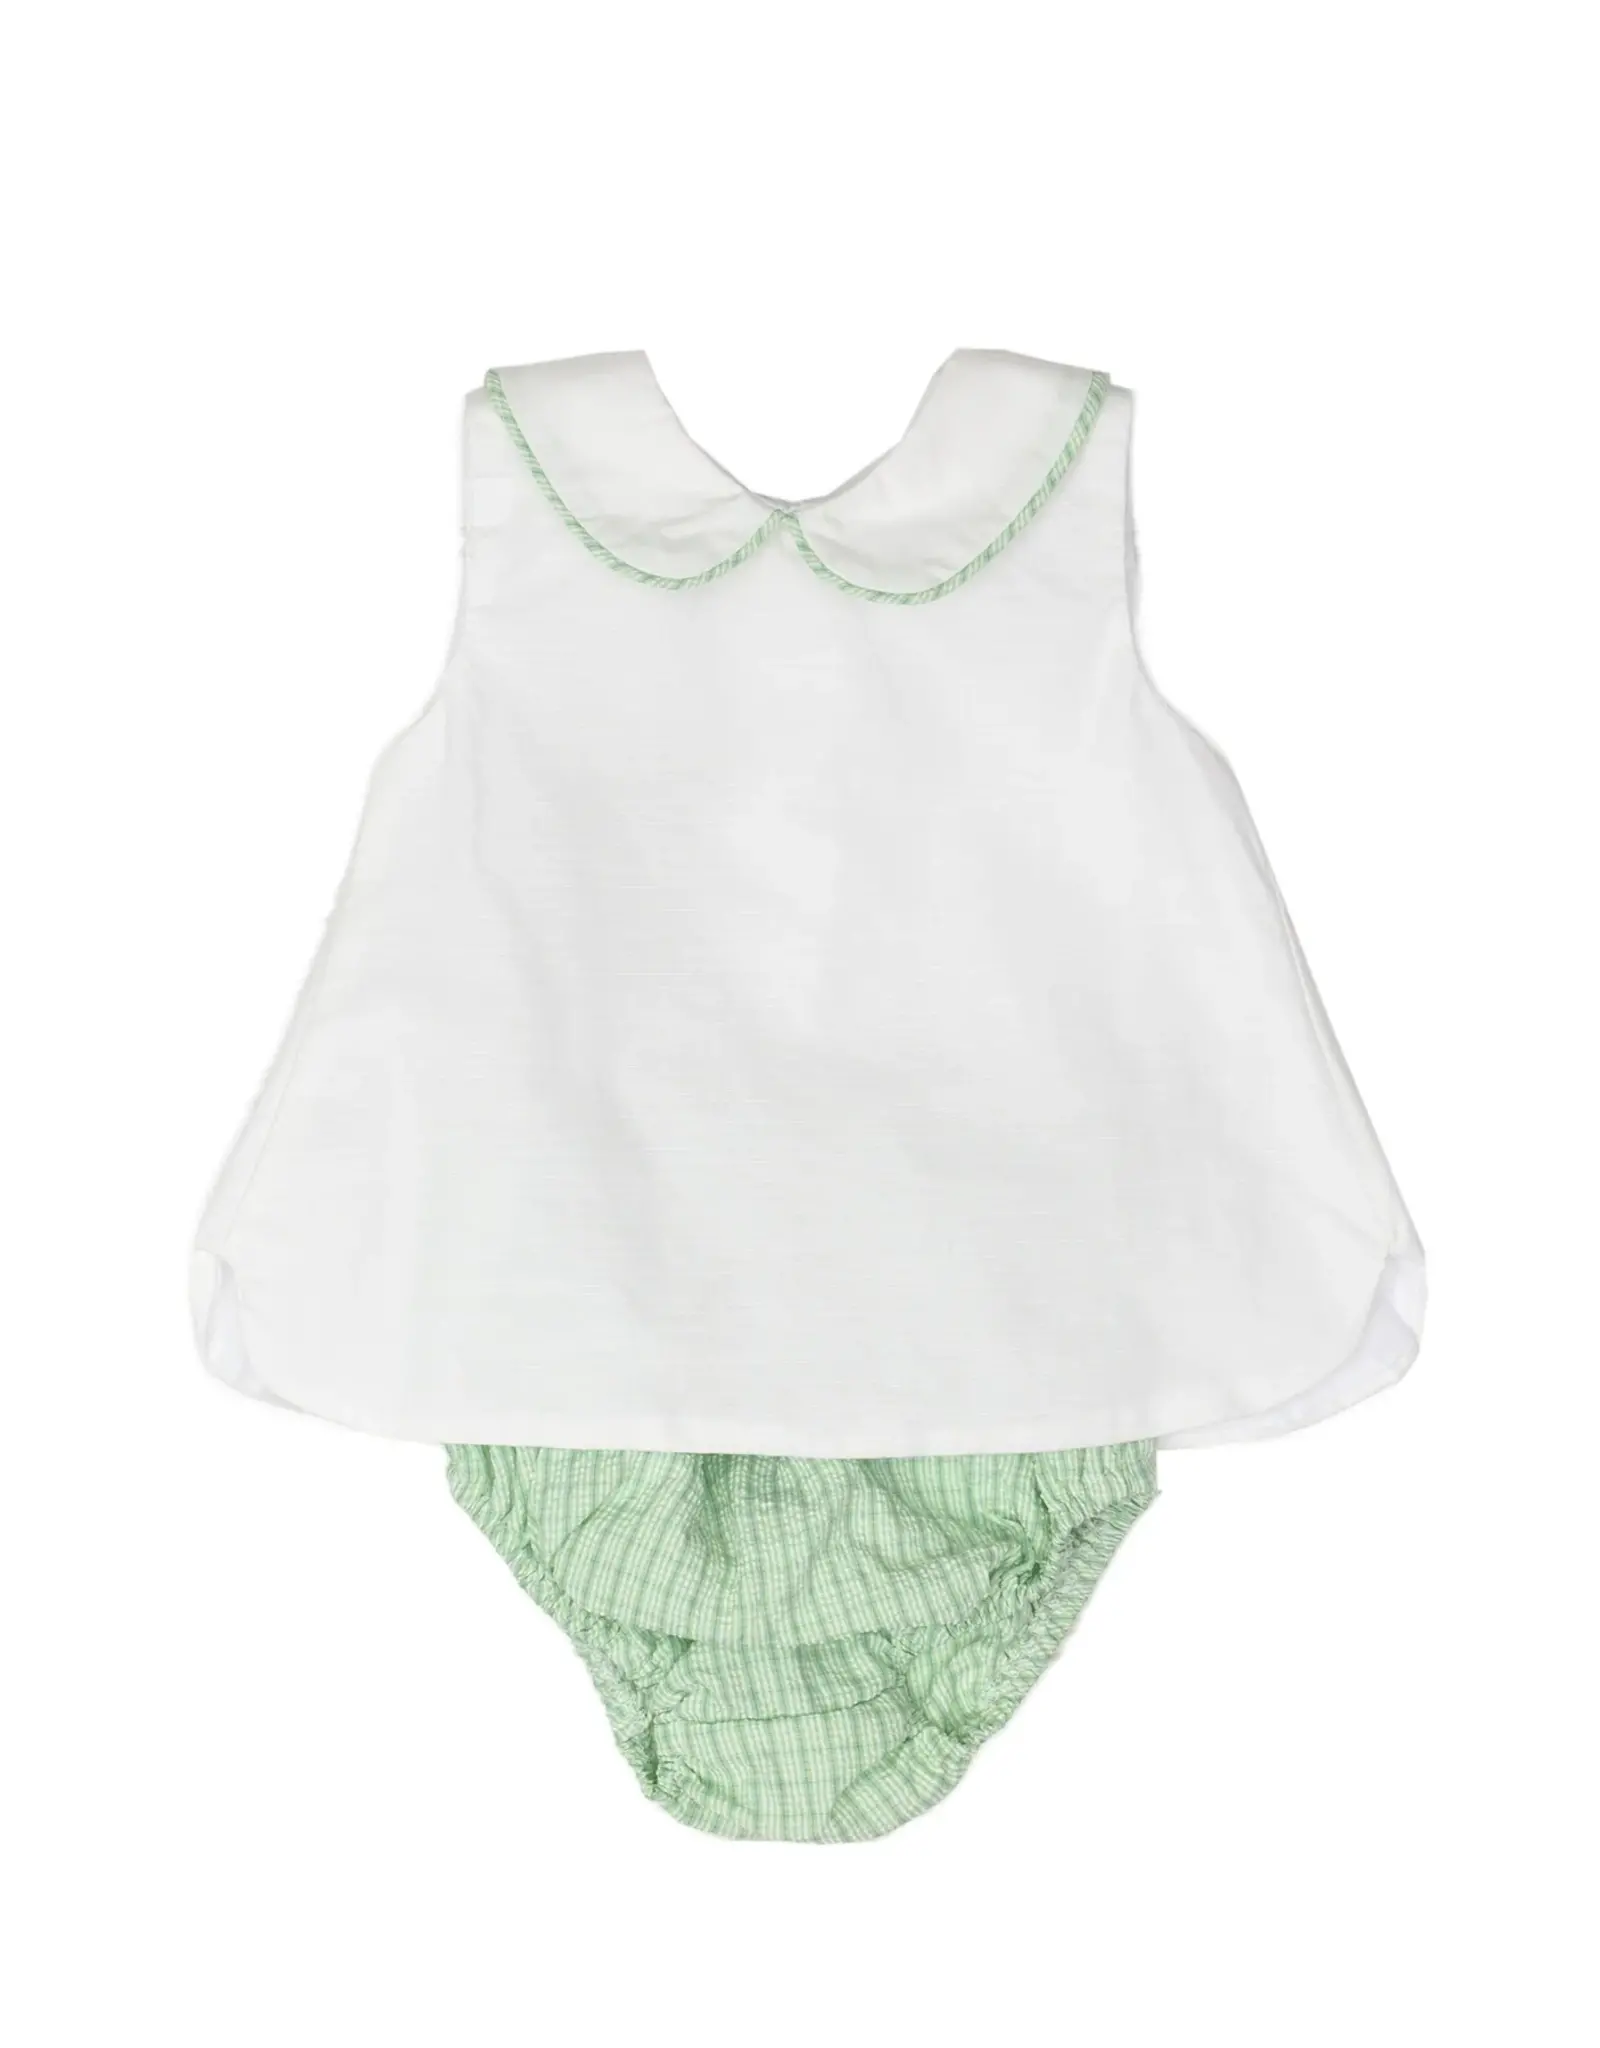 The Oaks Rayleigh Green Check Diaper Set